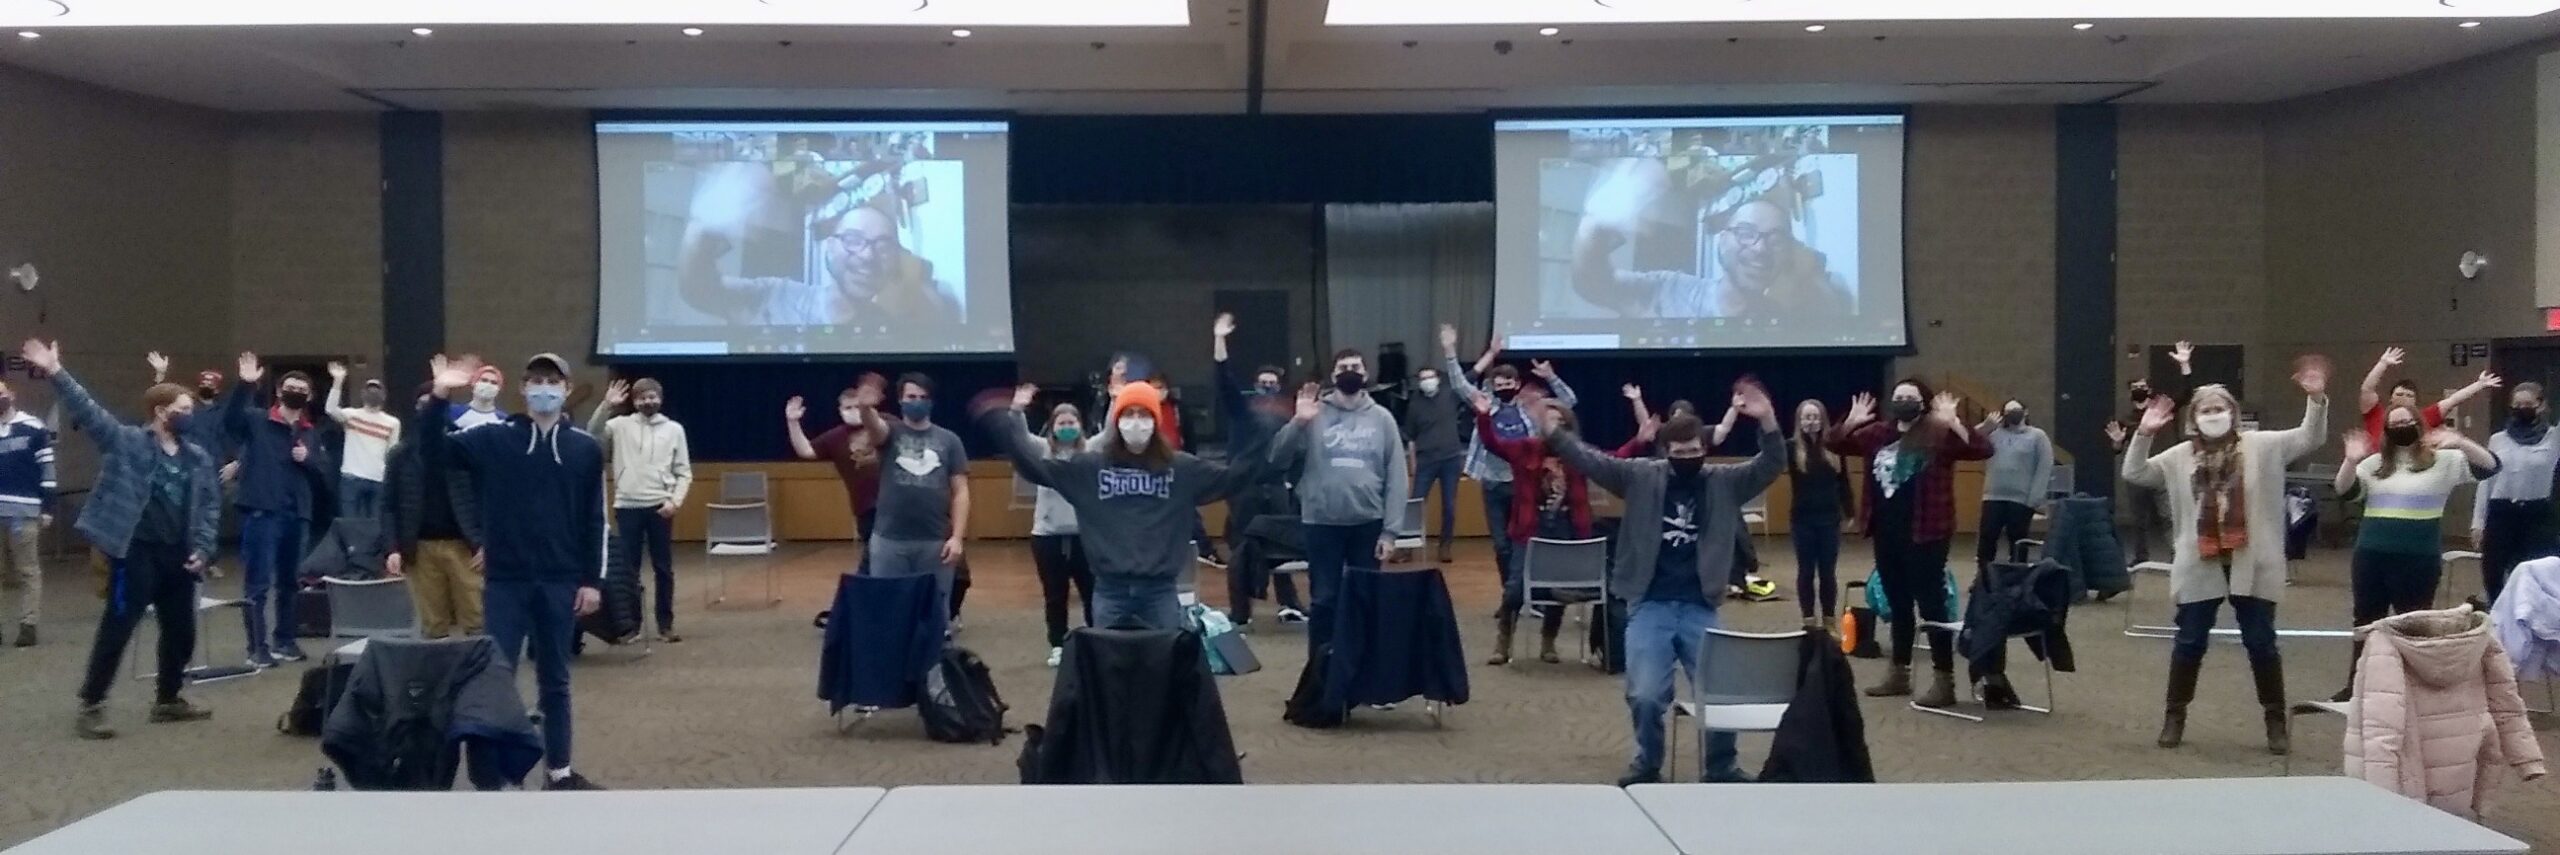 UW Stout Students wave during a digital engagement with Paulo Padilha